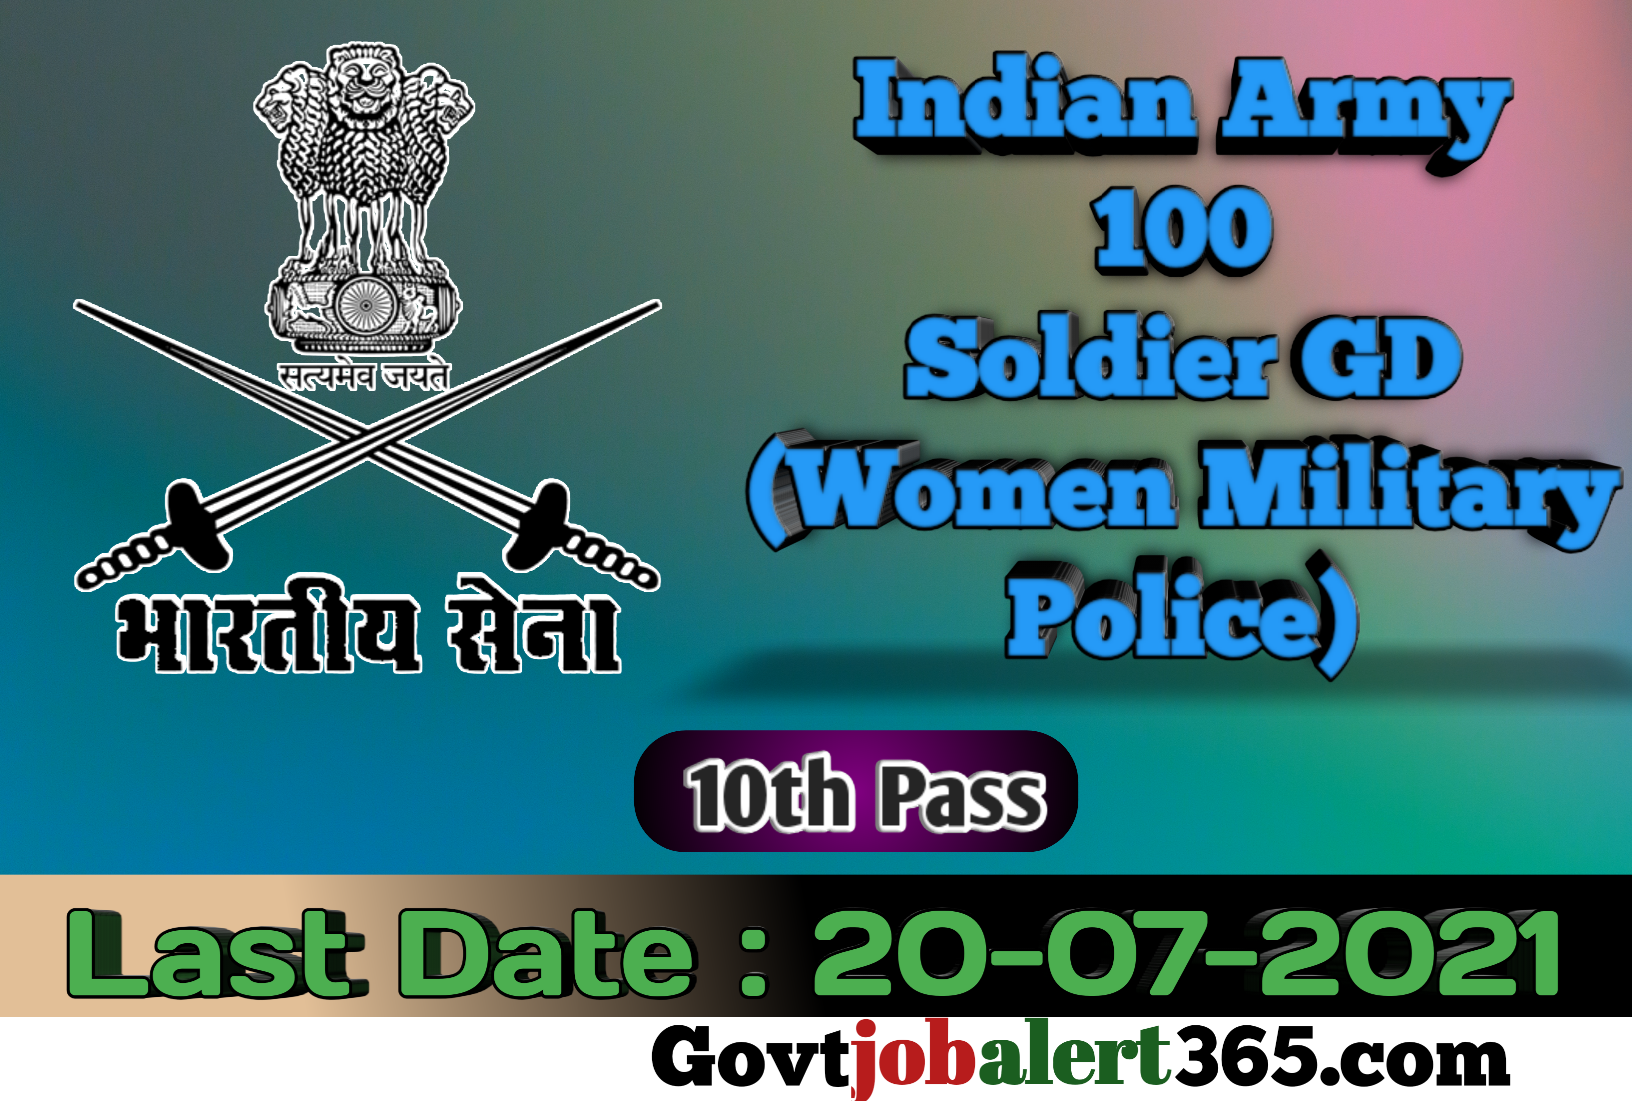 Indian Army Women Military Police Recruitment 2021